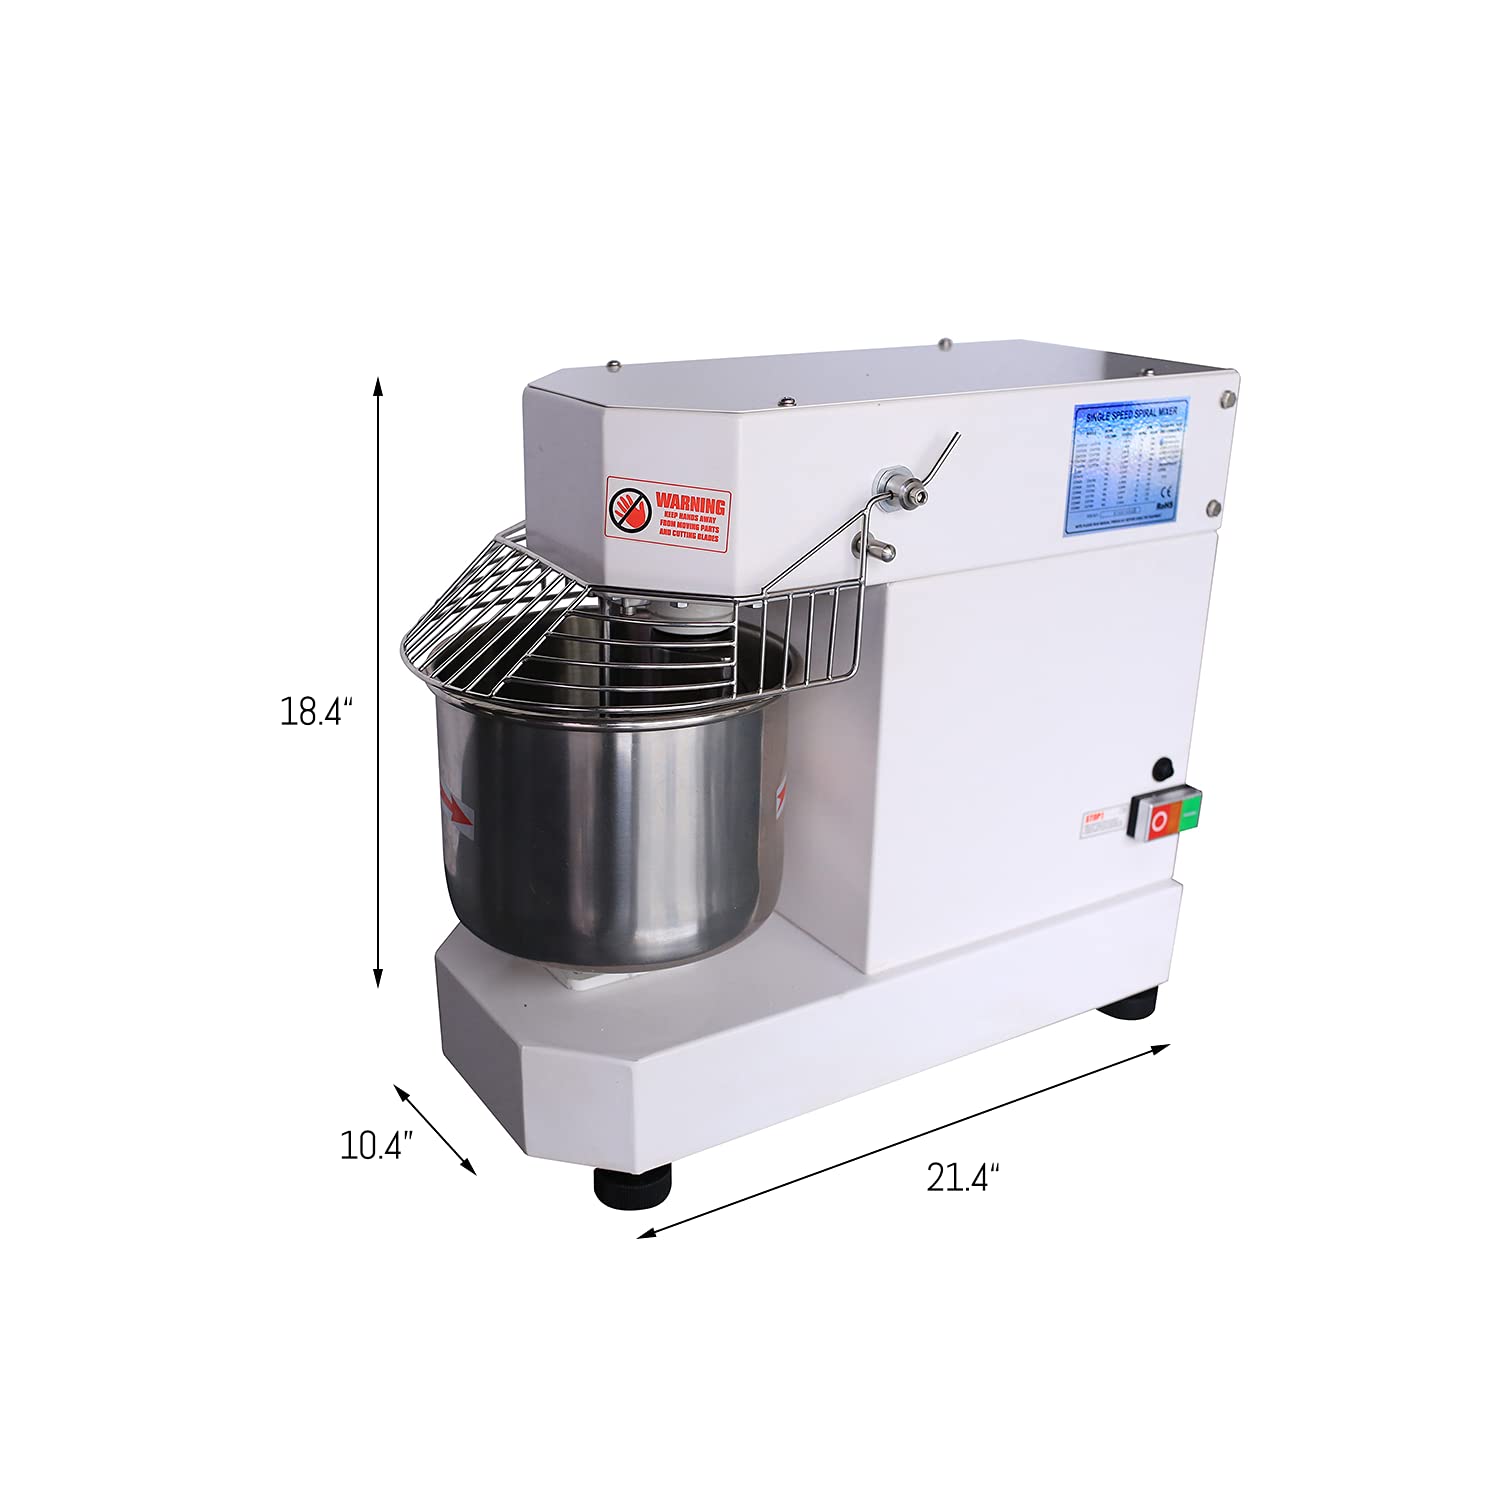 Hakka Commercial Dough Mixer, 5 Qt Spiral Mixer Food Mixer Machine with Food-grade Stainless Steel Bowl, Security Shield & Timer